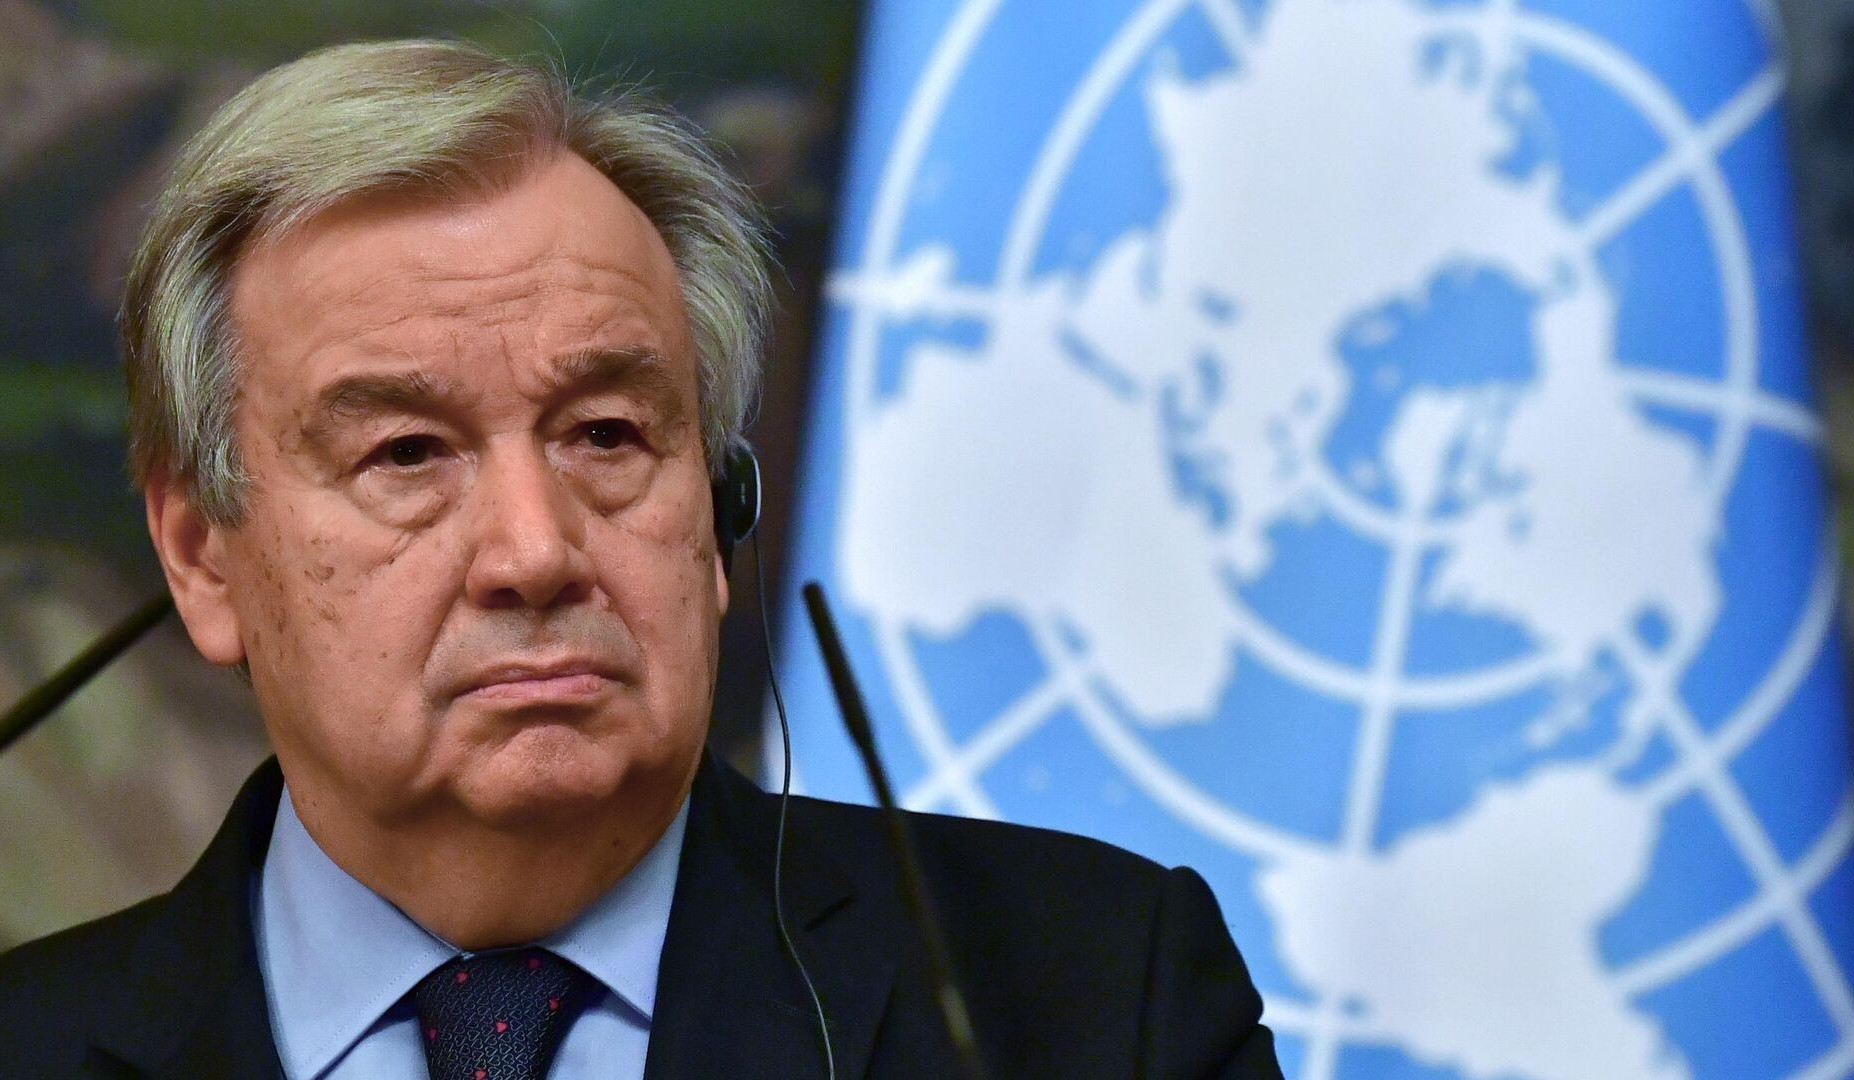 UN Secretary-General of expressed concern over events in Nagorno-Karabakh